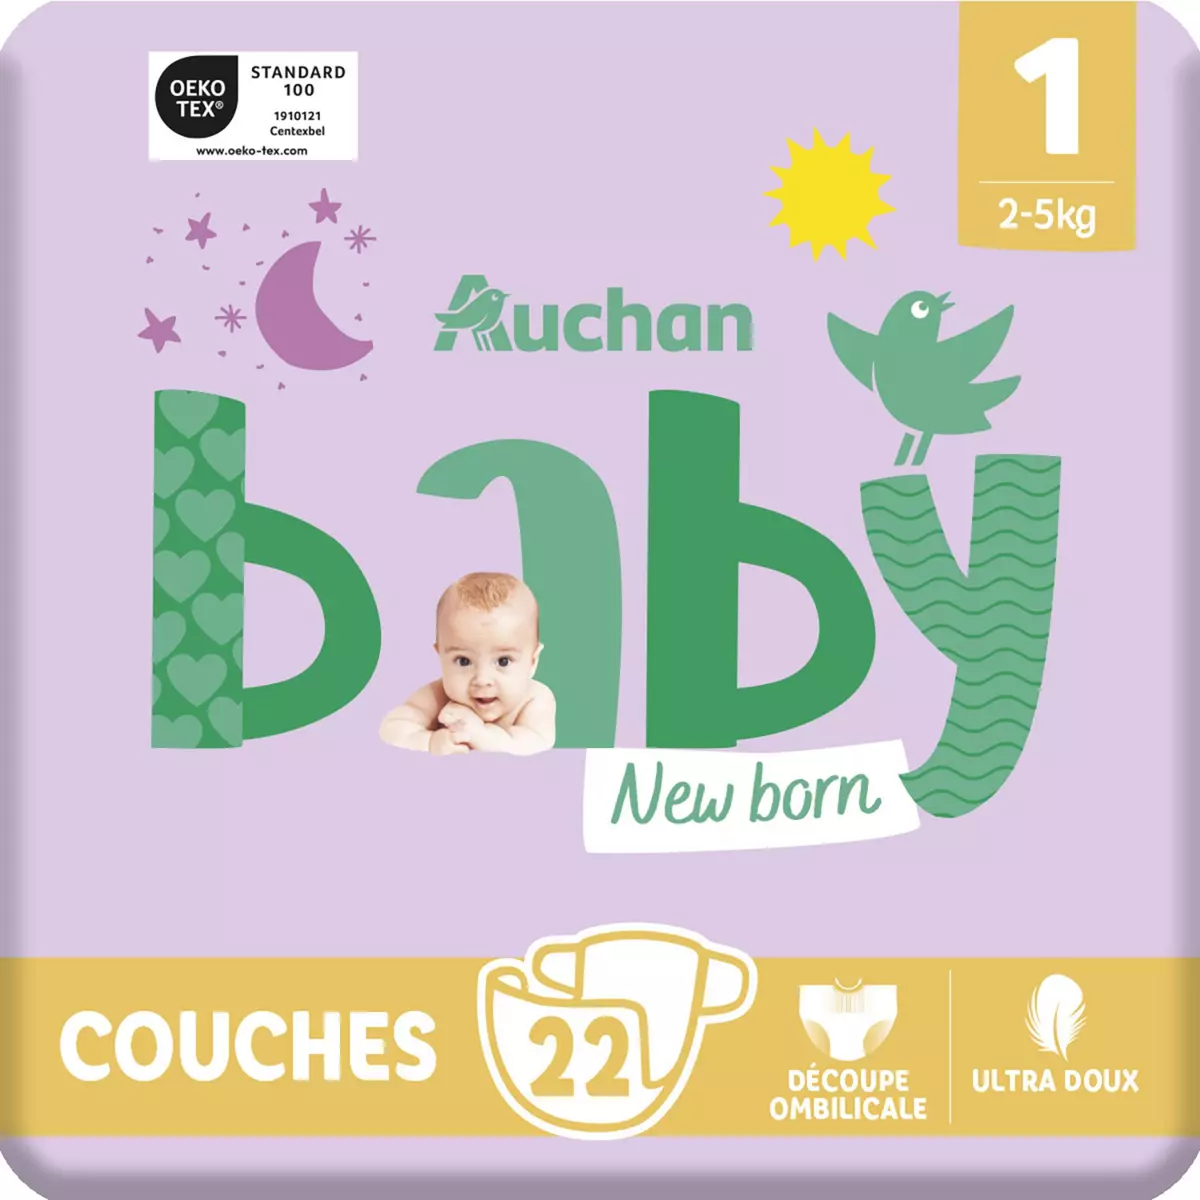 Couches New Baby Premium Protection, taille 1 : 2-5 kg 